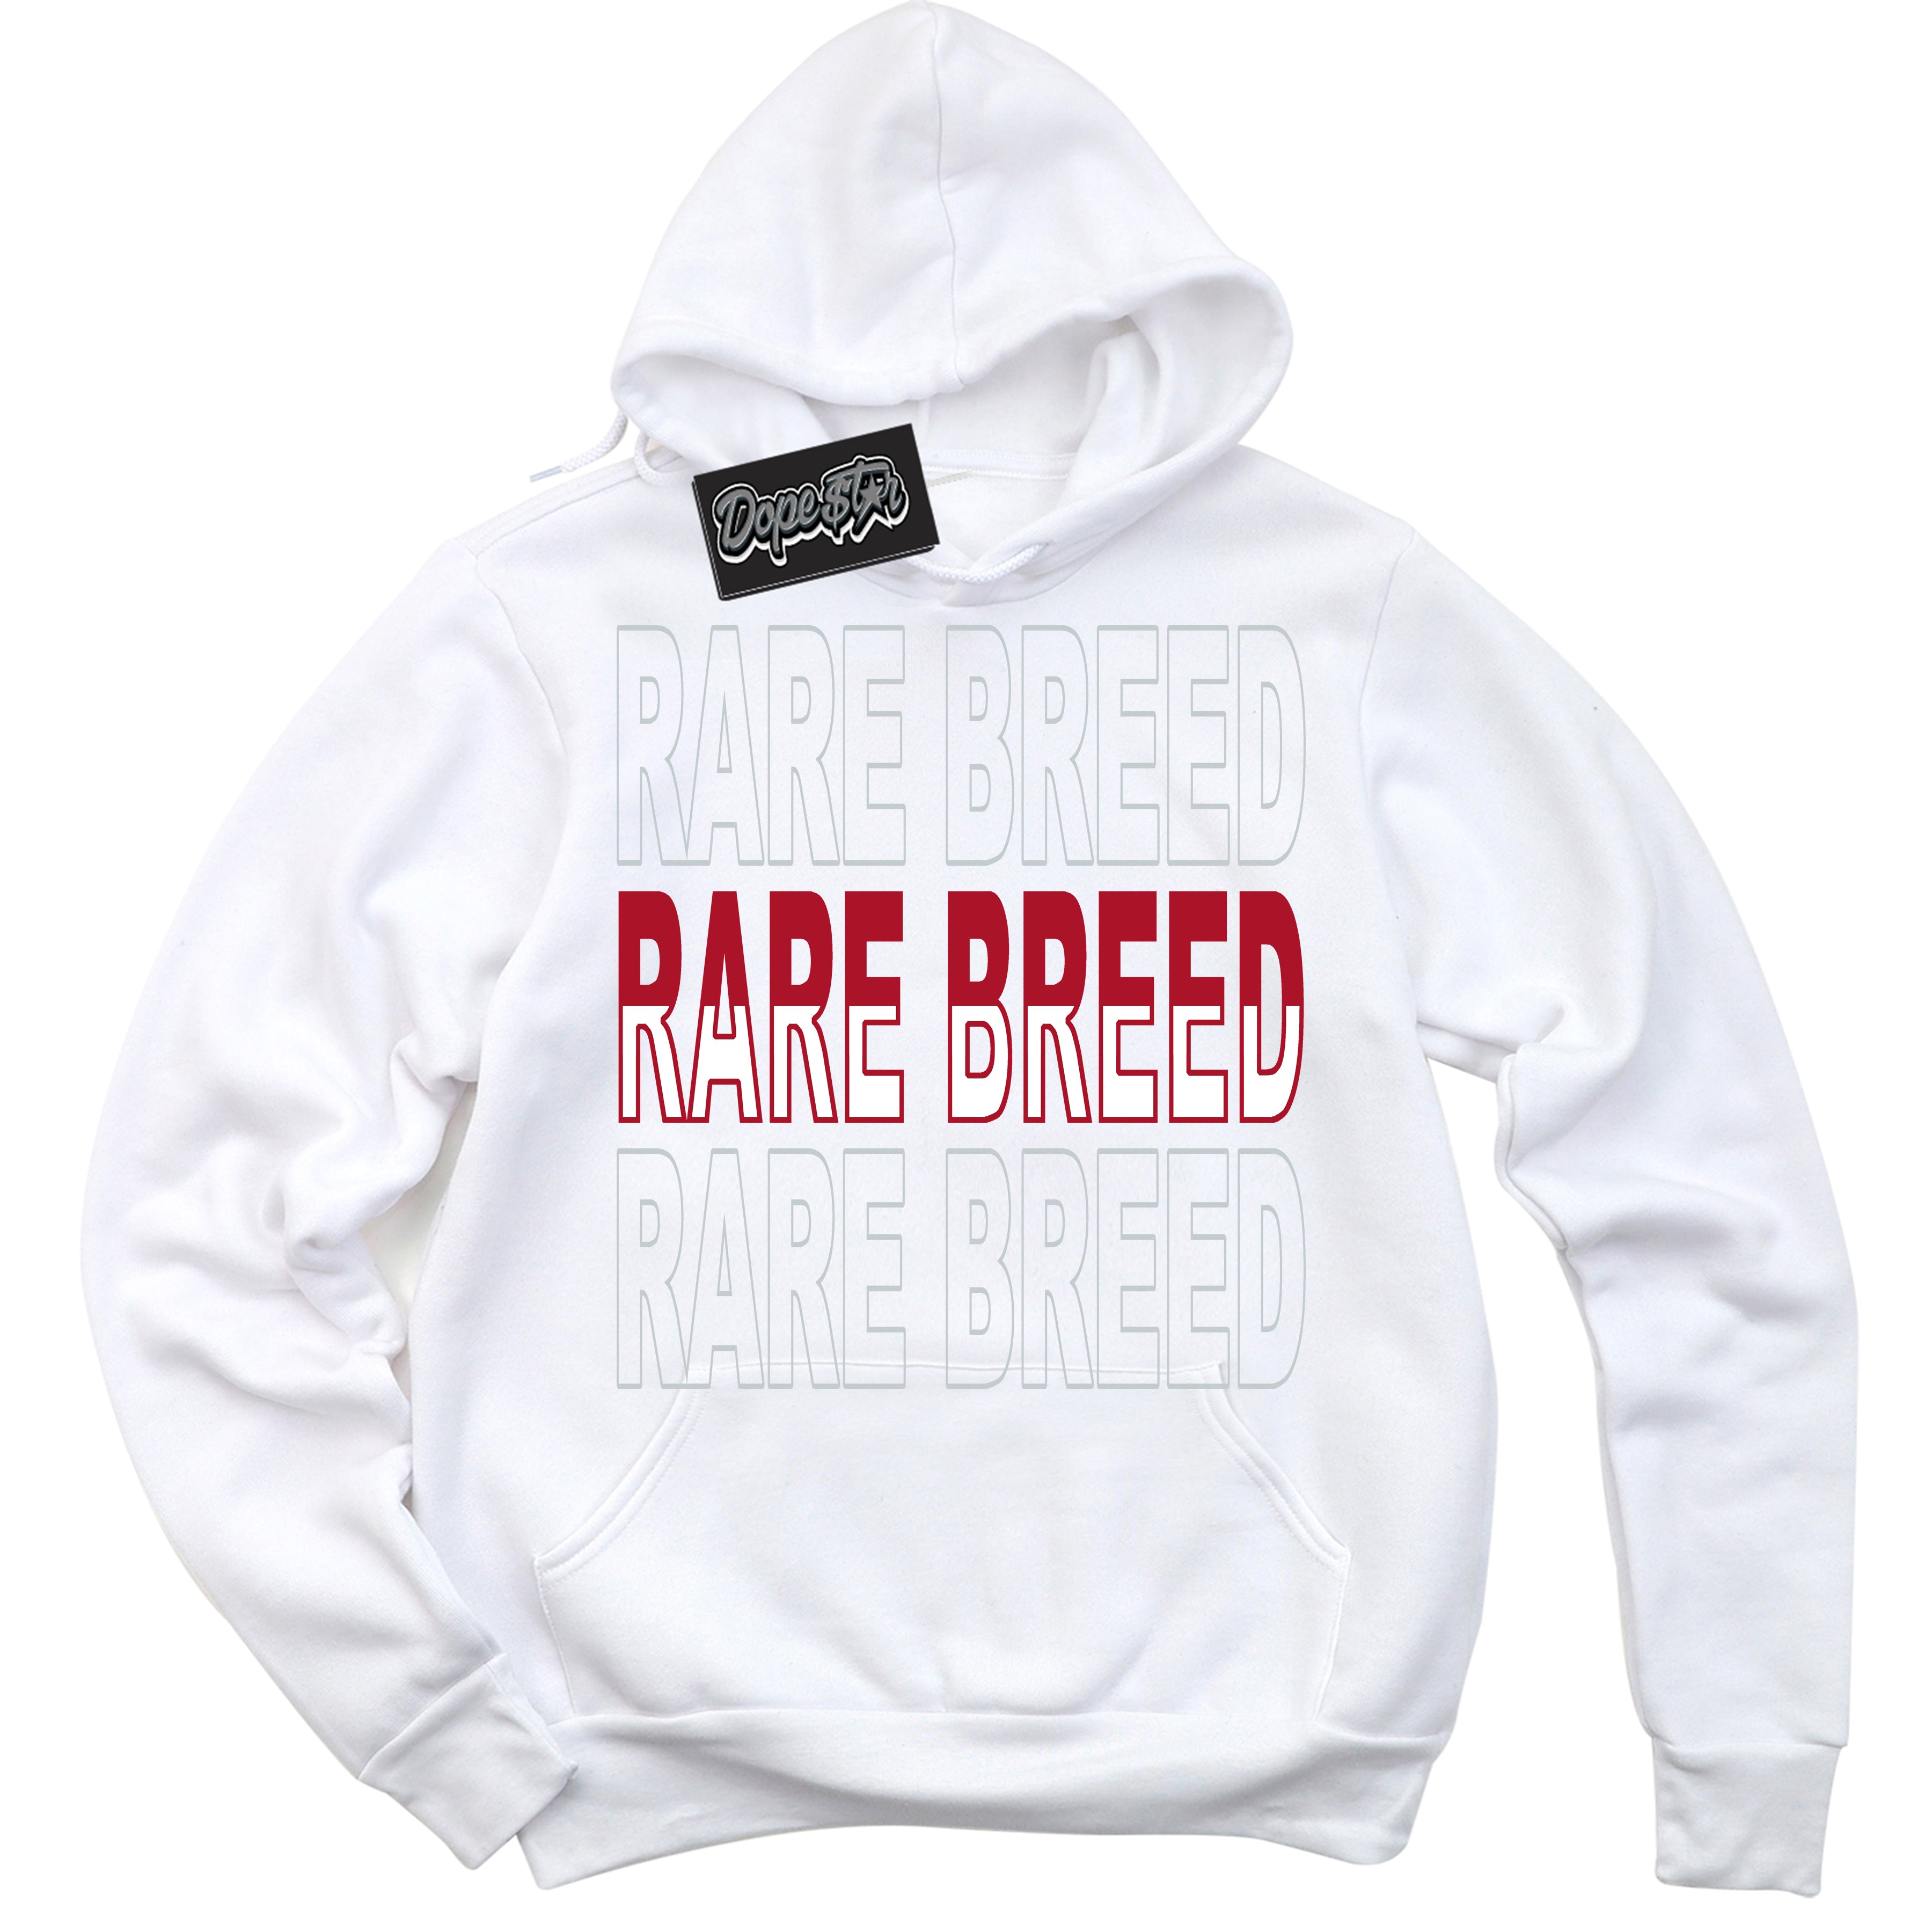 Cool White Hoodie with “ Rare Breed ”  design that Perfectly Matches  Reverse Ultraman Sneakers.